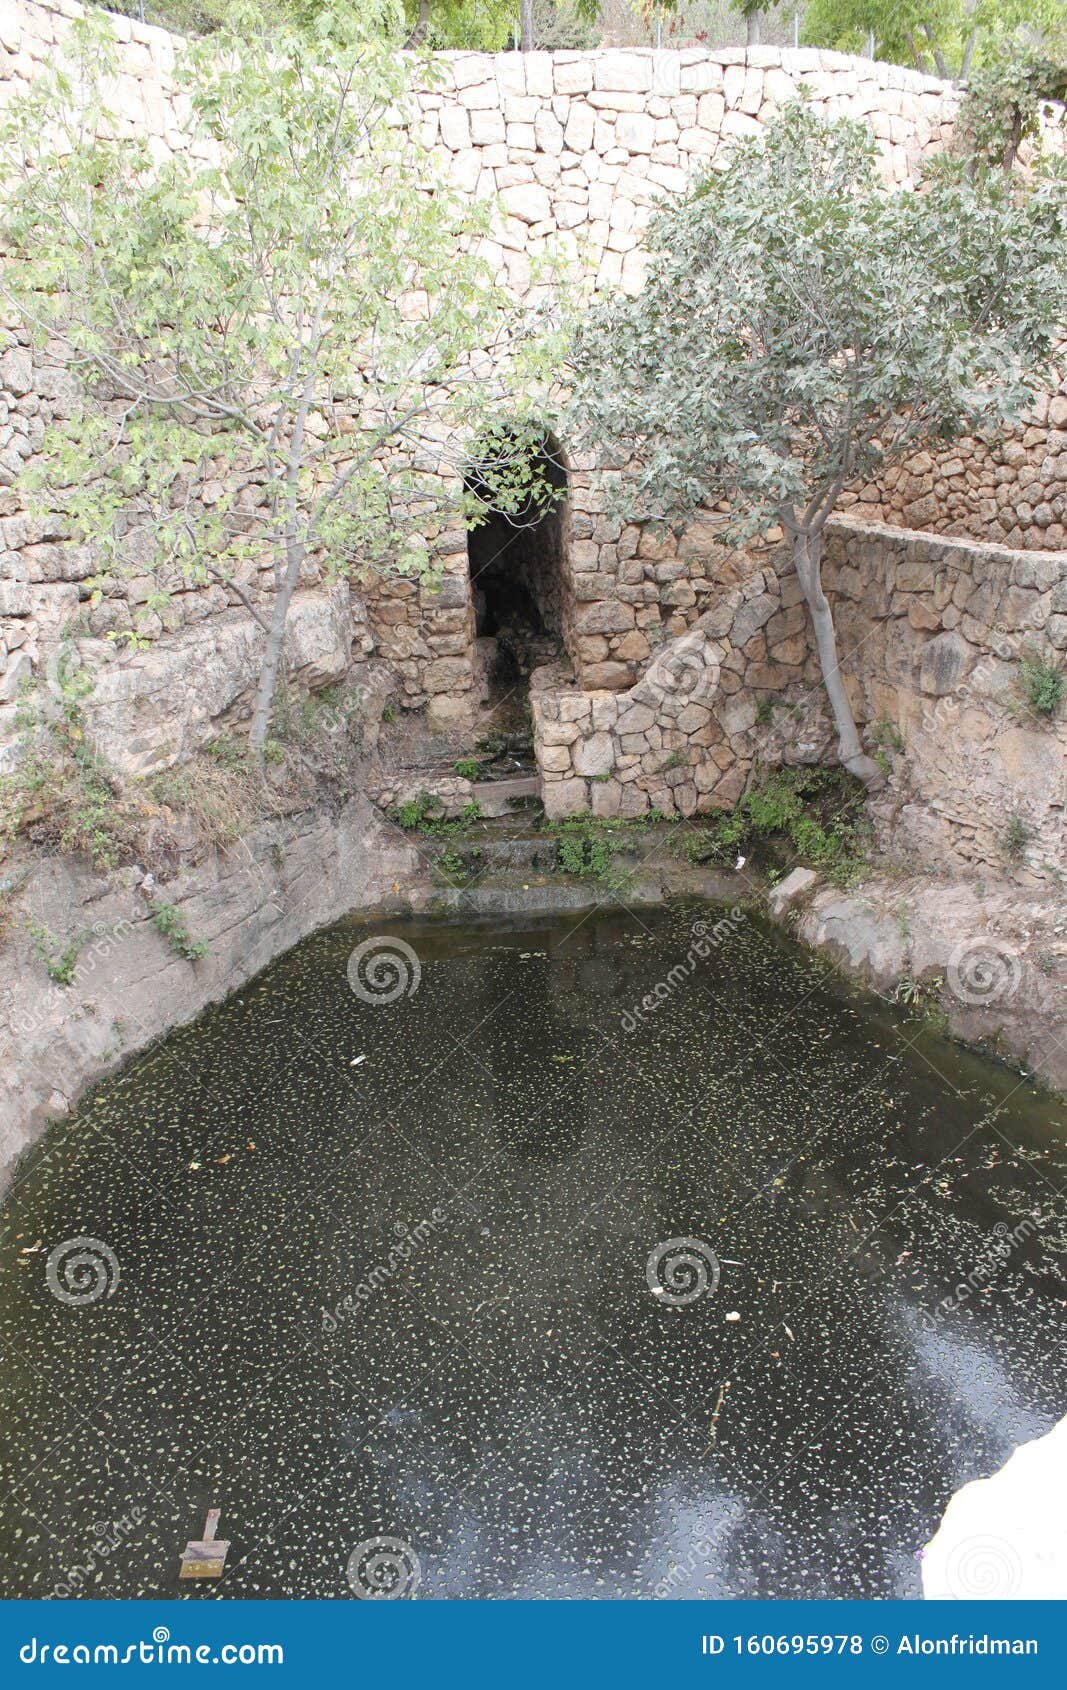 https://thumbs.dreamstime.com/z/natural-water-spring-pool-surrounded-stone-walls-agriculture-irrigation-sataf-ancient-agriculture-site-nature-160695978.jpg